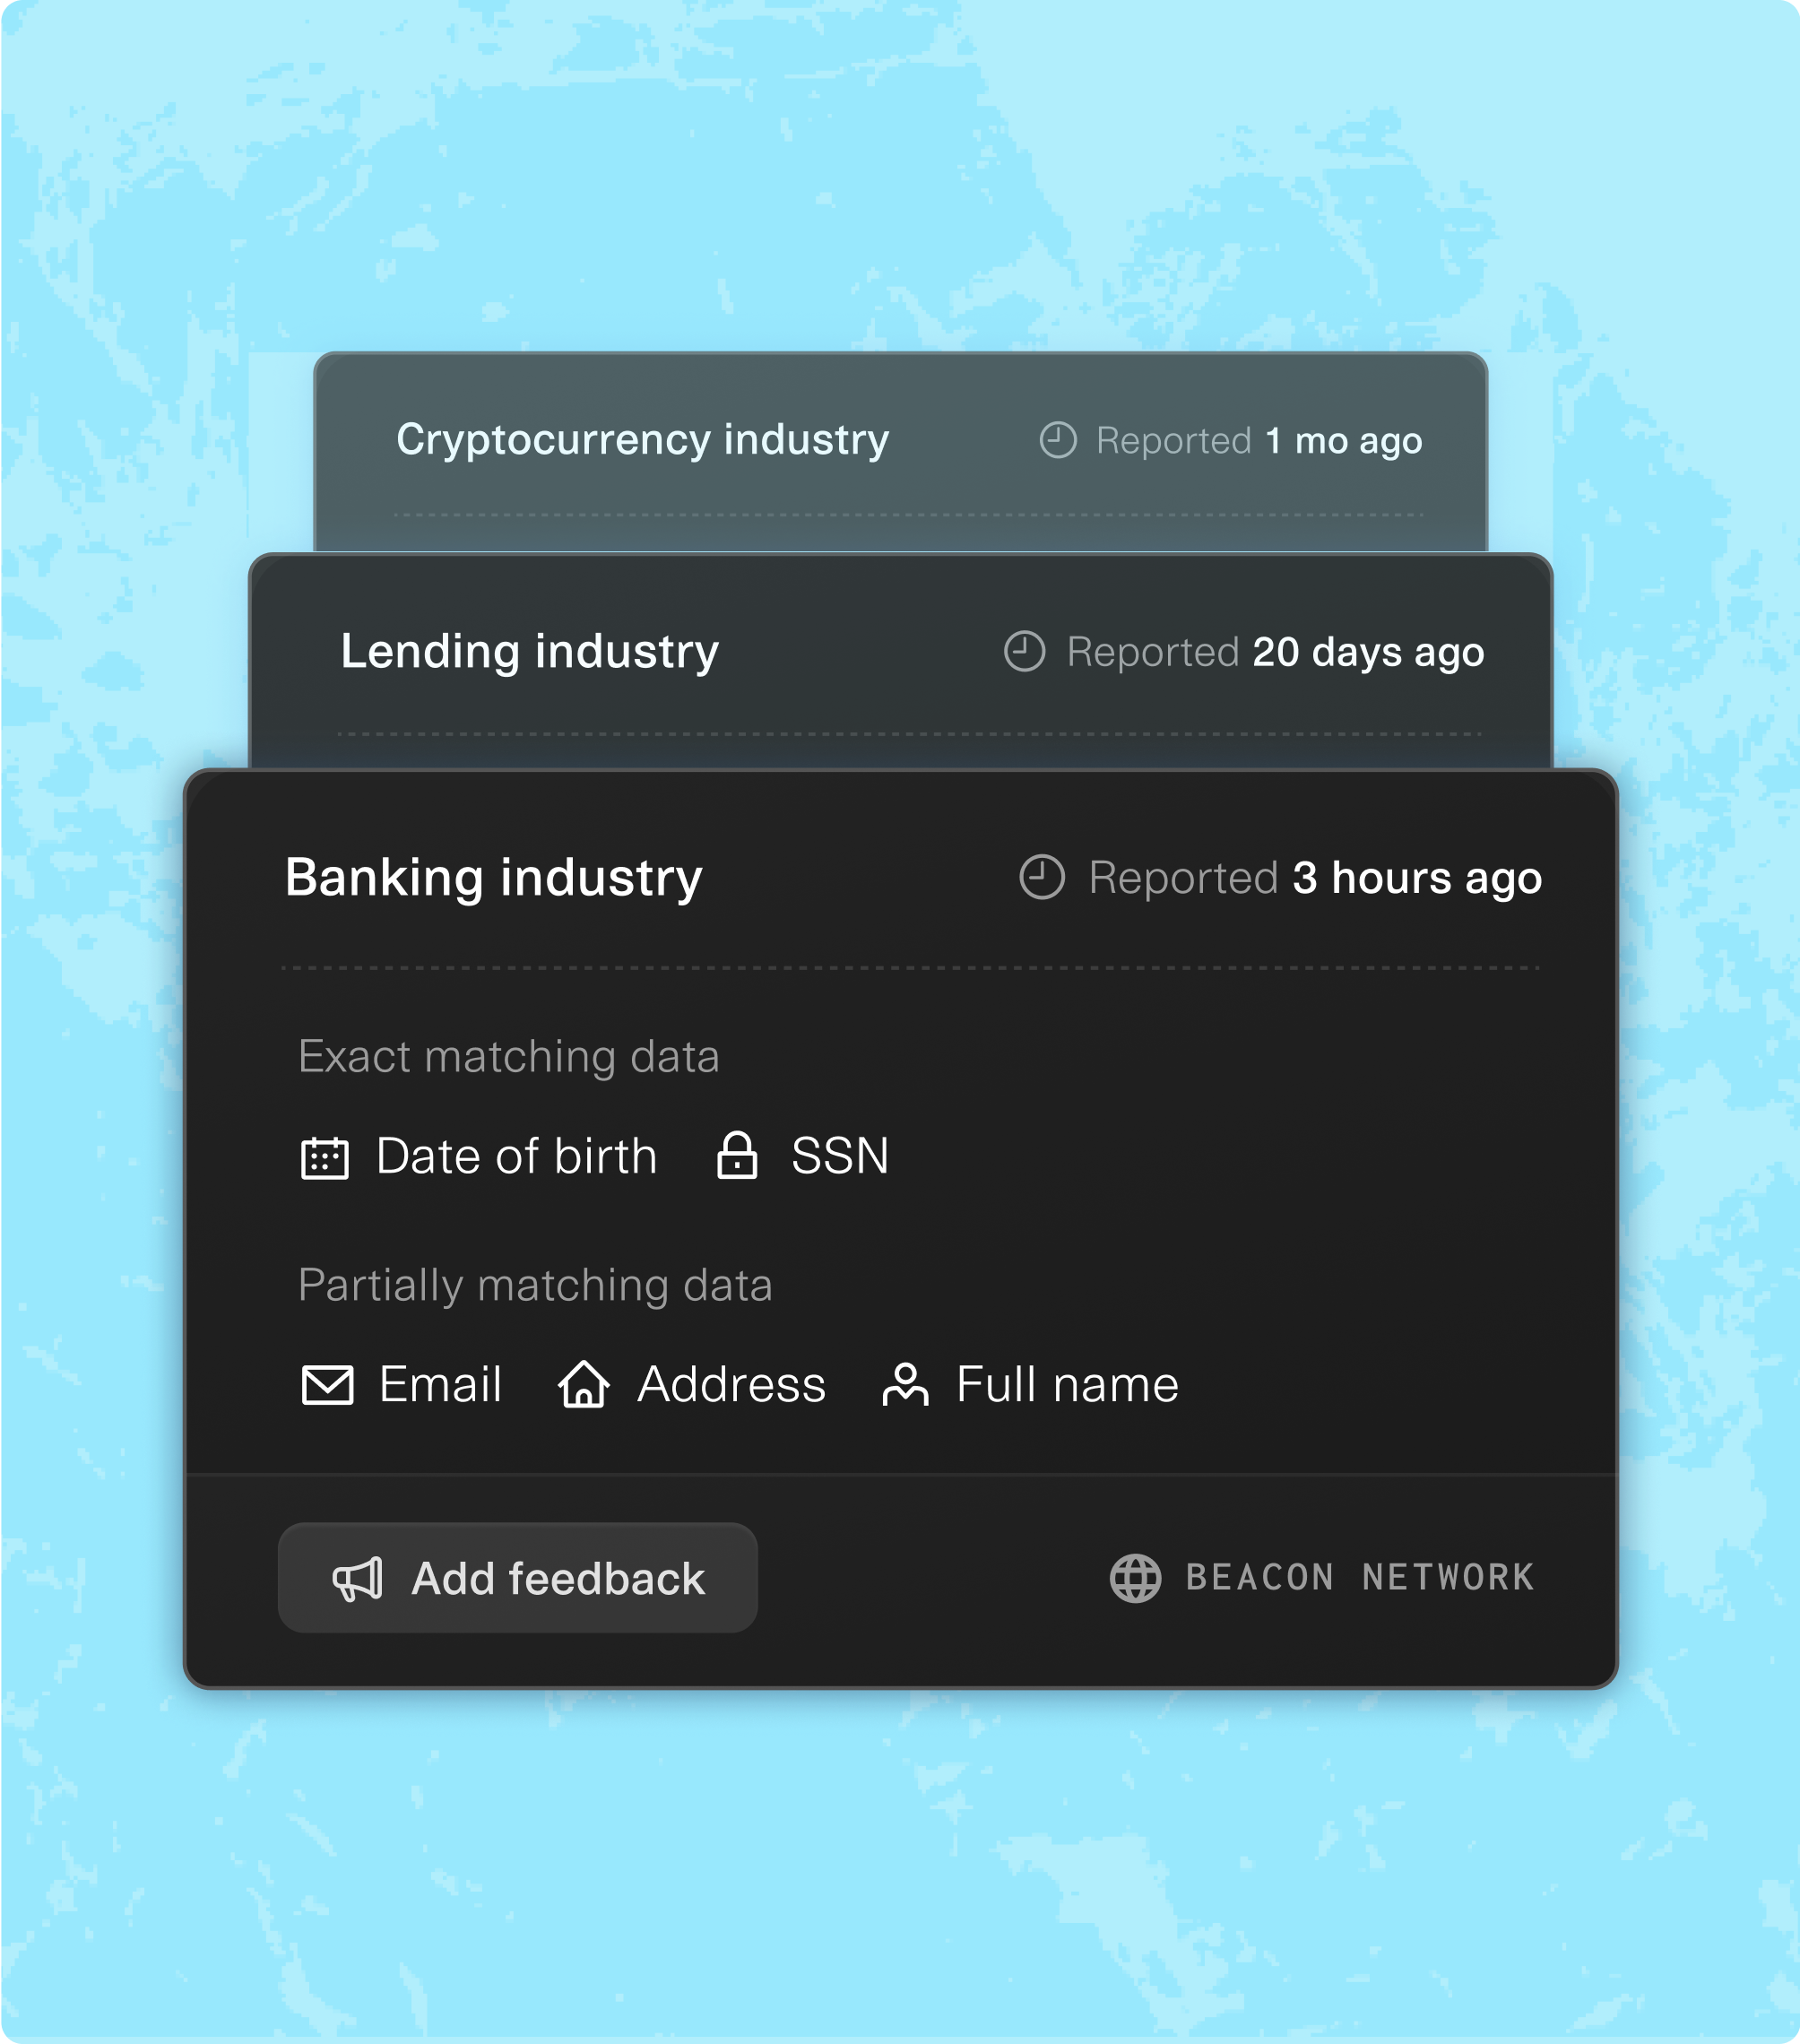 different reports from different organizations, like banking, lending, cryptocurrency